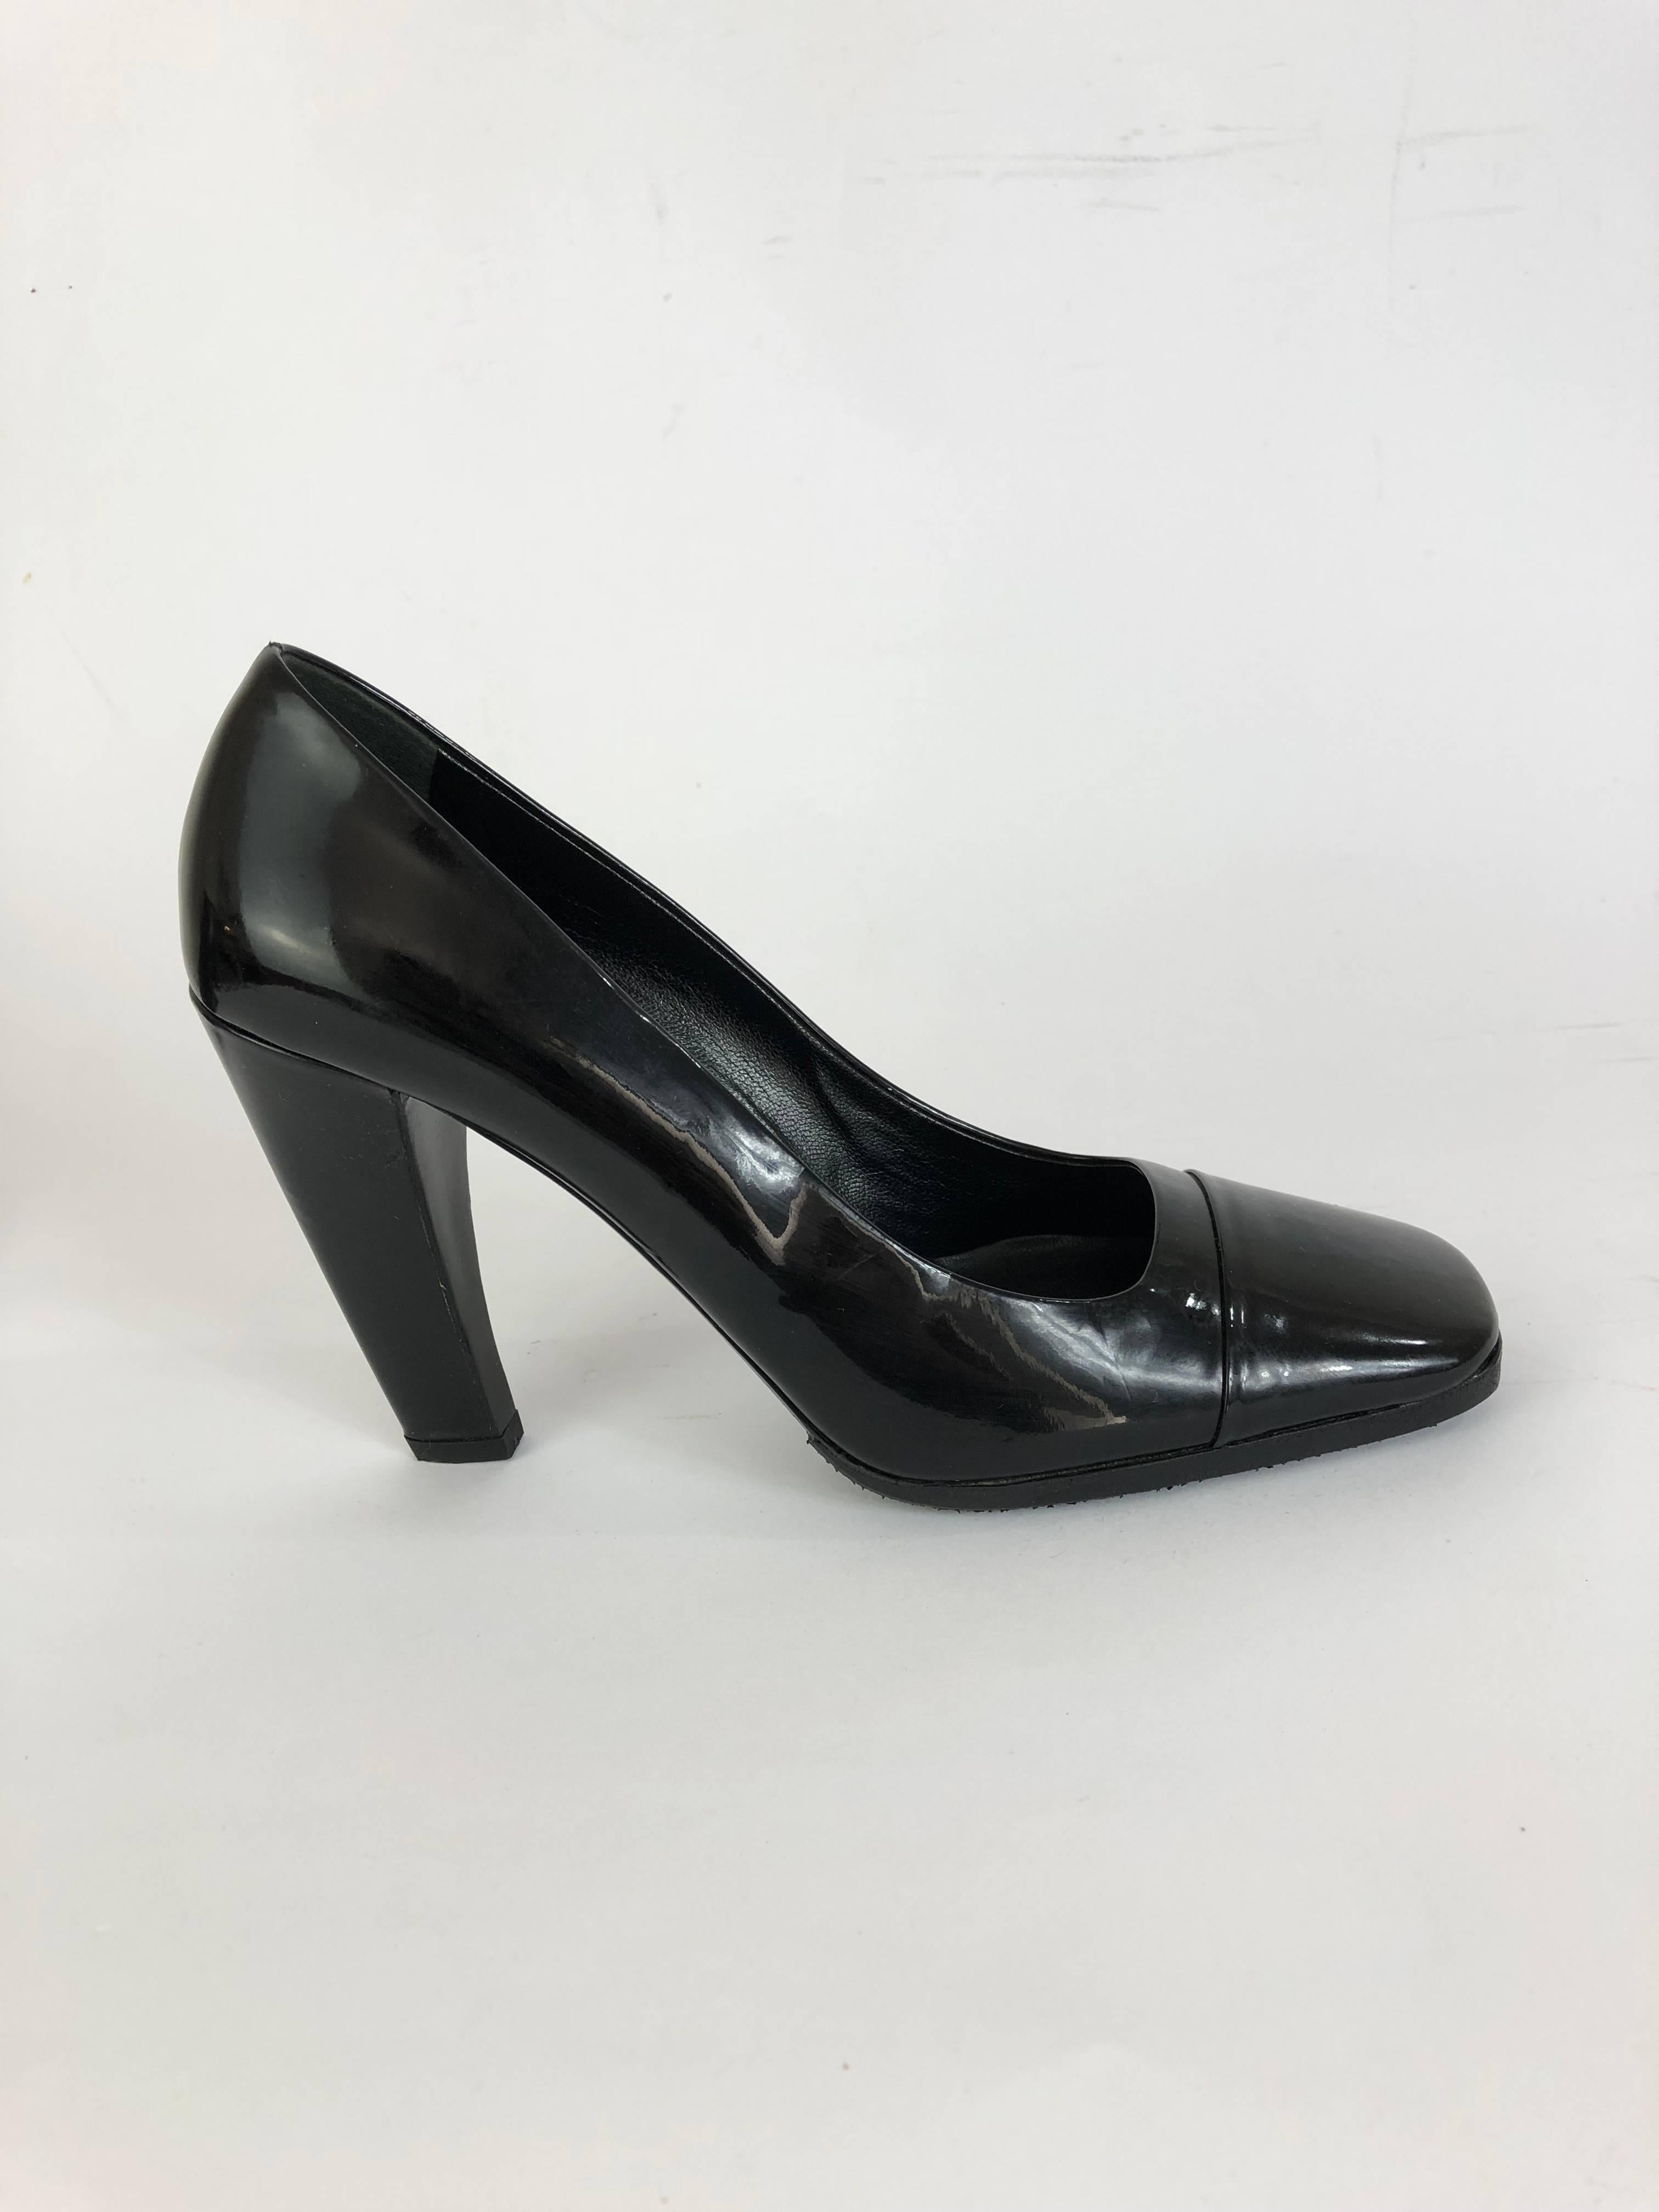 Prada shoes with classic high heel. They are in patent leather, black color. The sole is made of leather and airlite wood milne, non-slip. The conditions are excellent, they are like new.

Size 38 IT 7.5 US 5 UK

Heel height: 10 cm
Conditions: Like